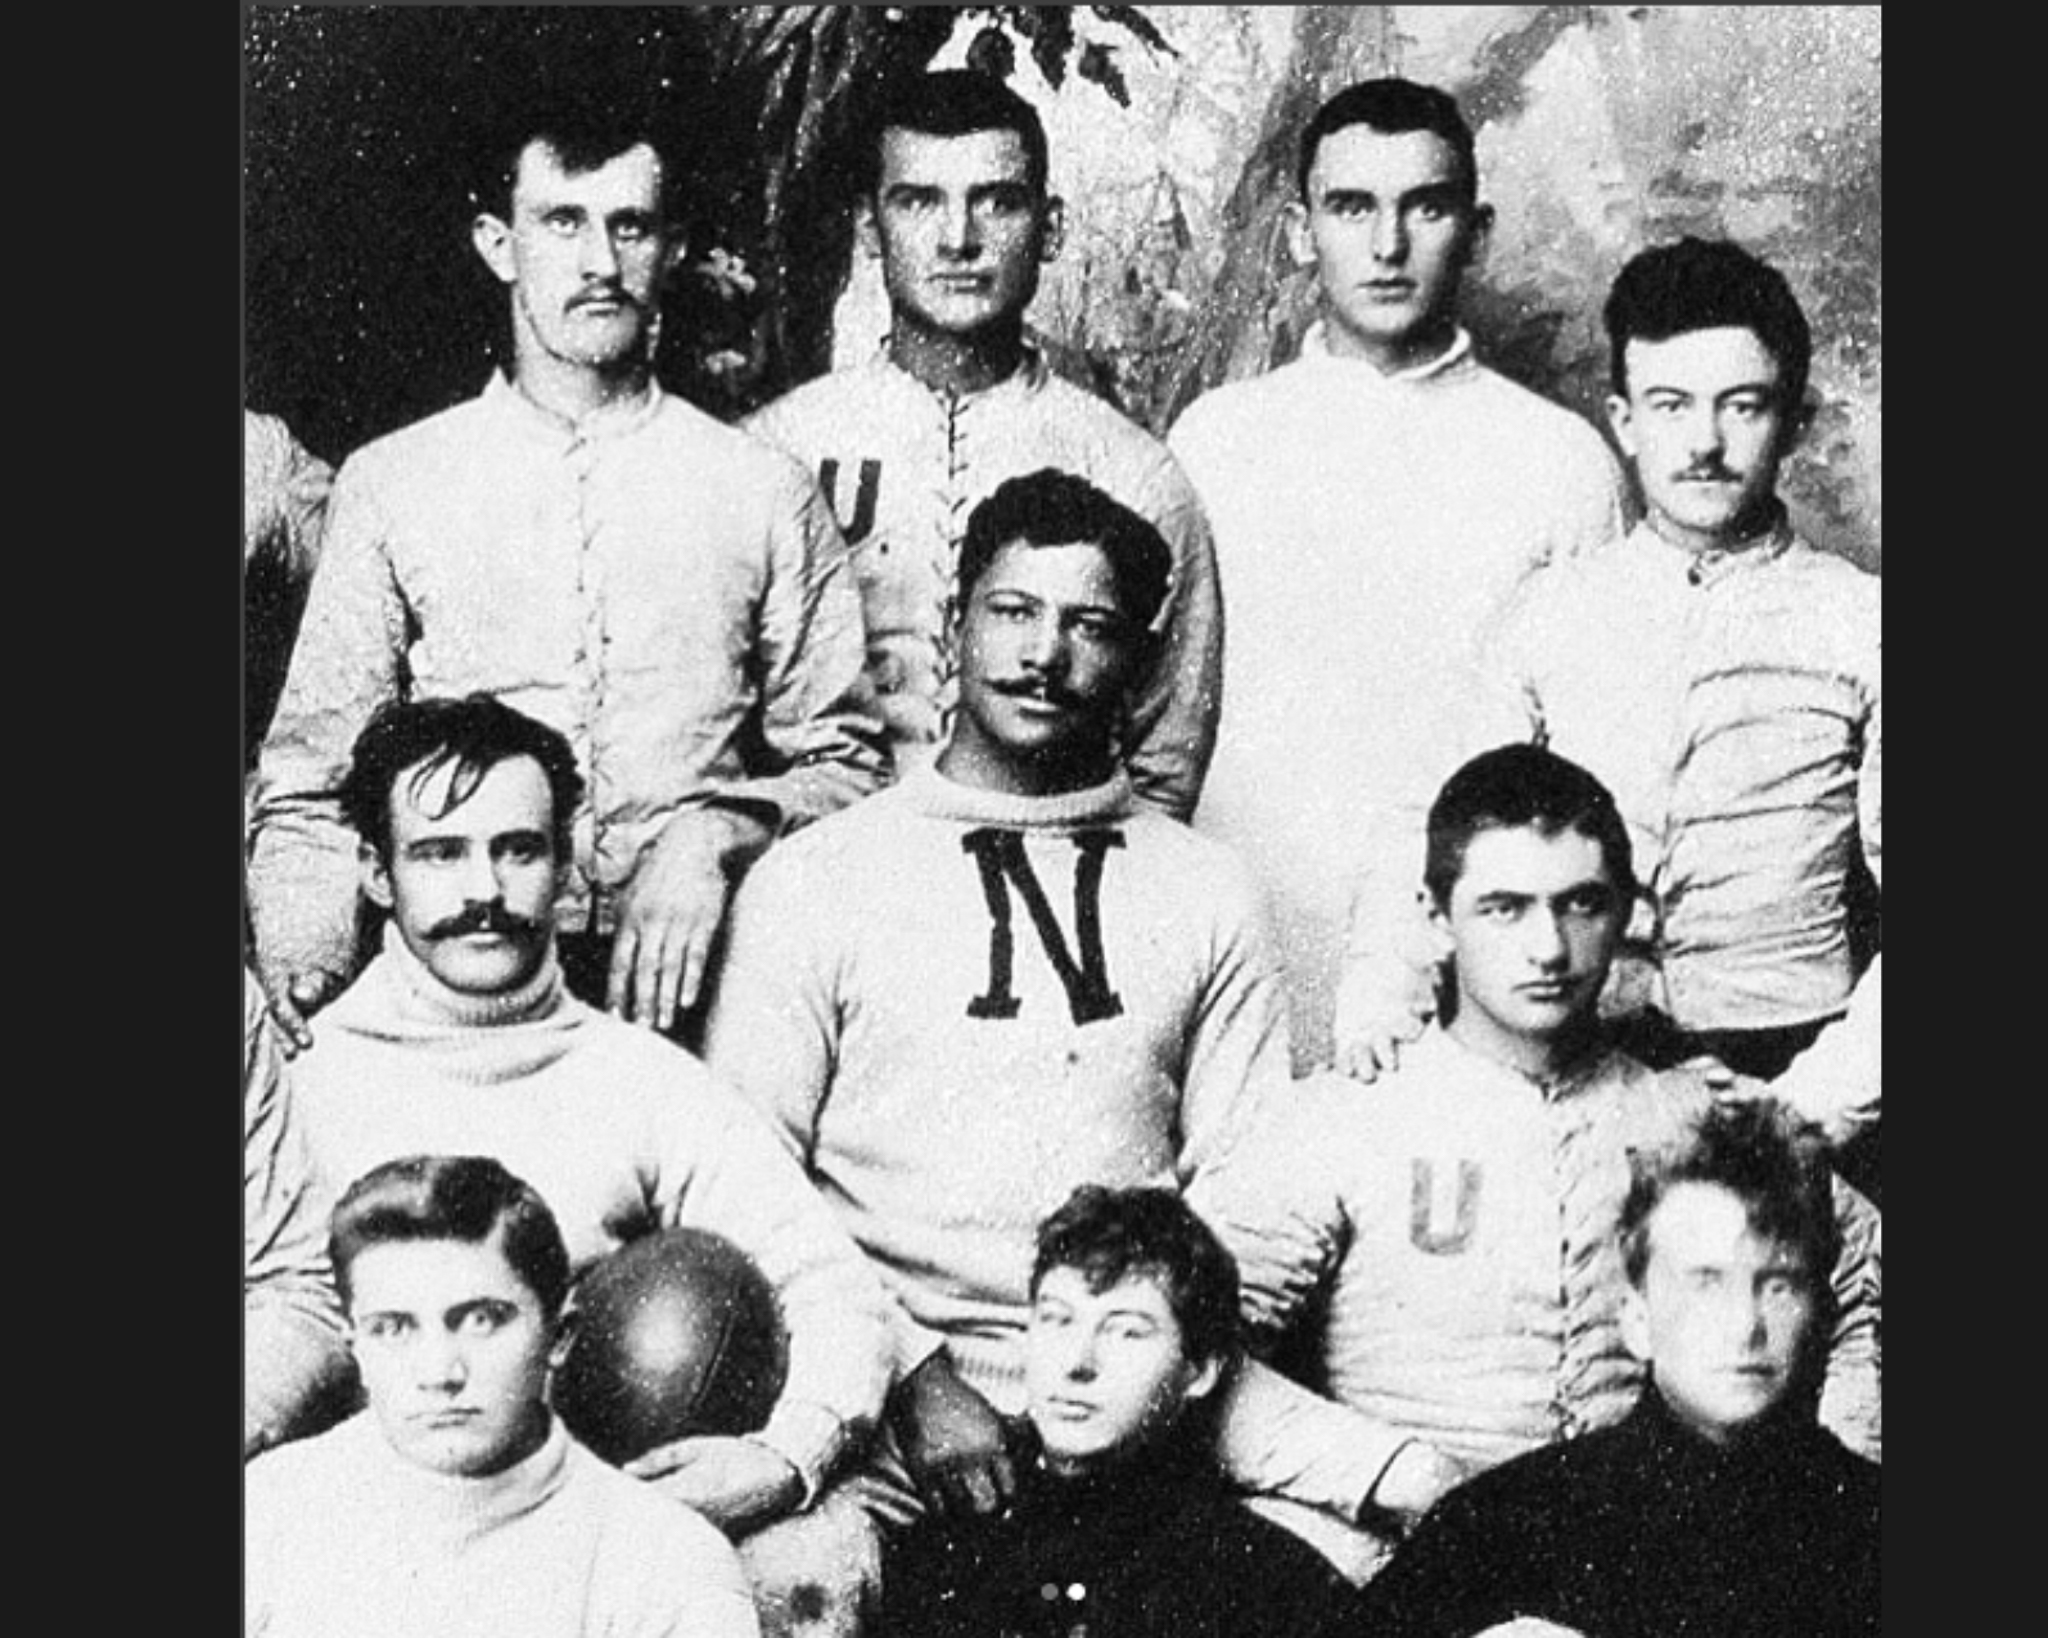 George Flippin, the first Black football player for the University of Nebraska